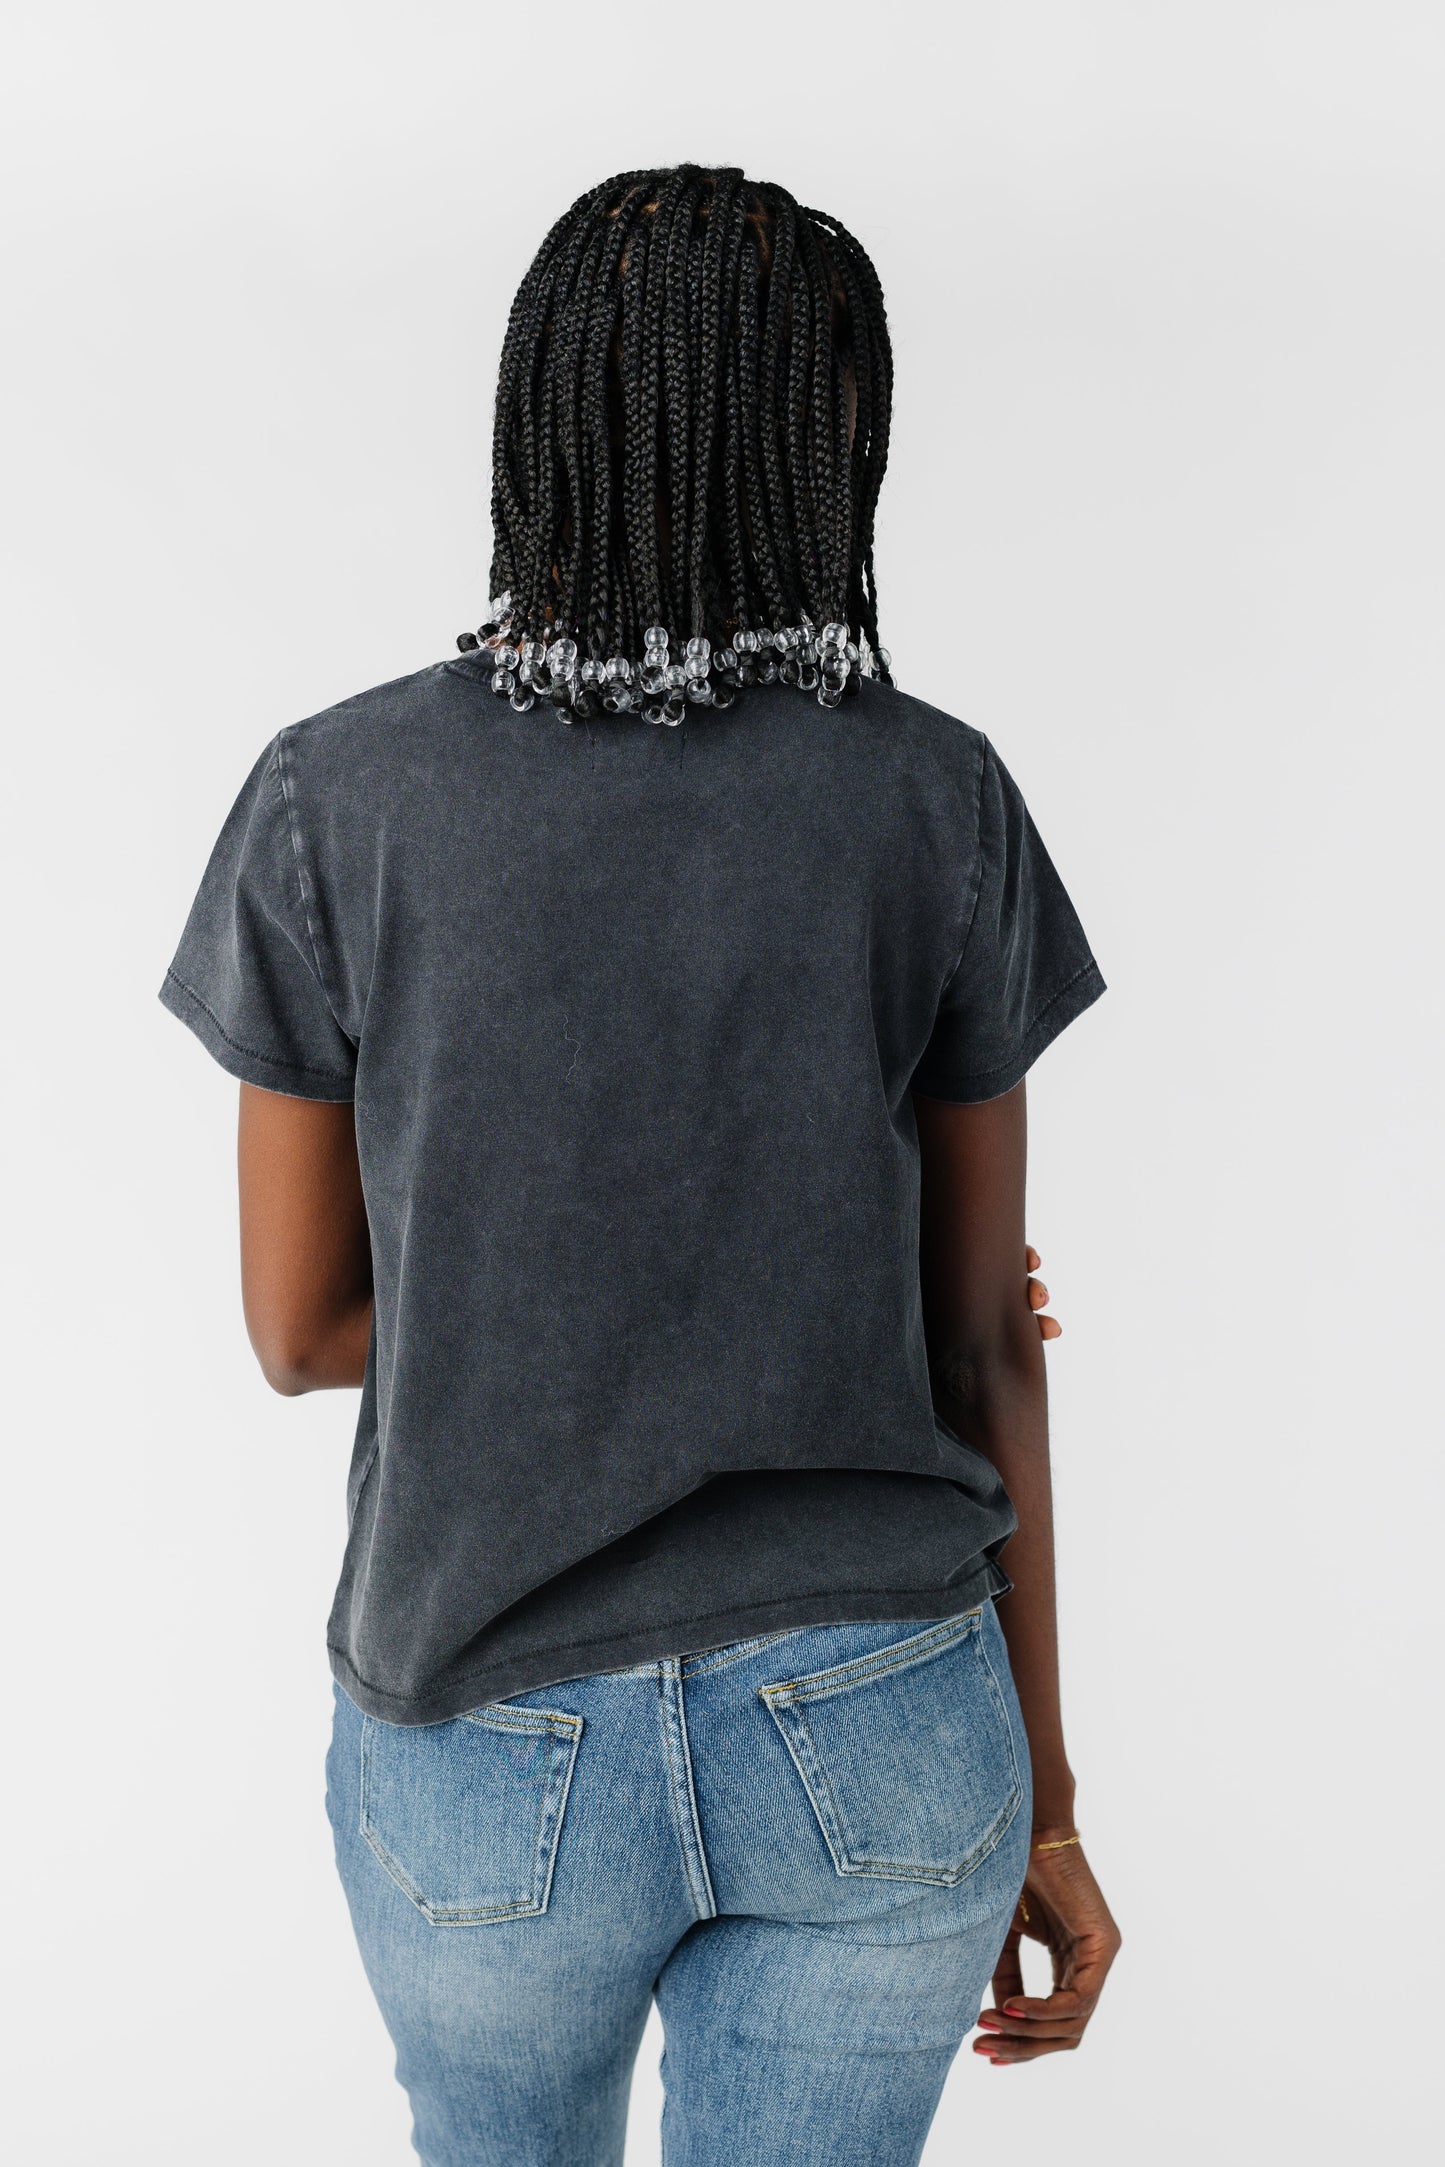 Asher Tee - Washed Black WOMEN'S T-SHIRT Thread & Supply 